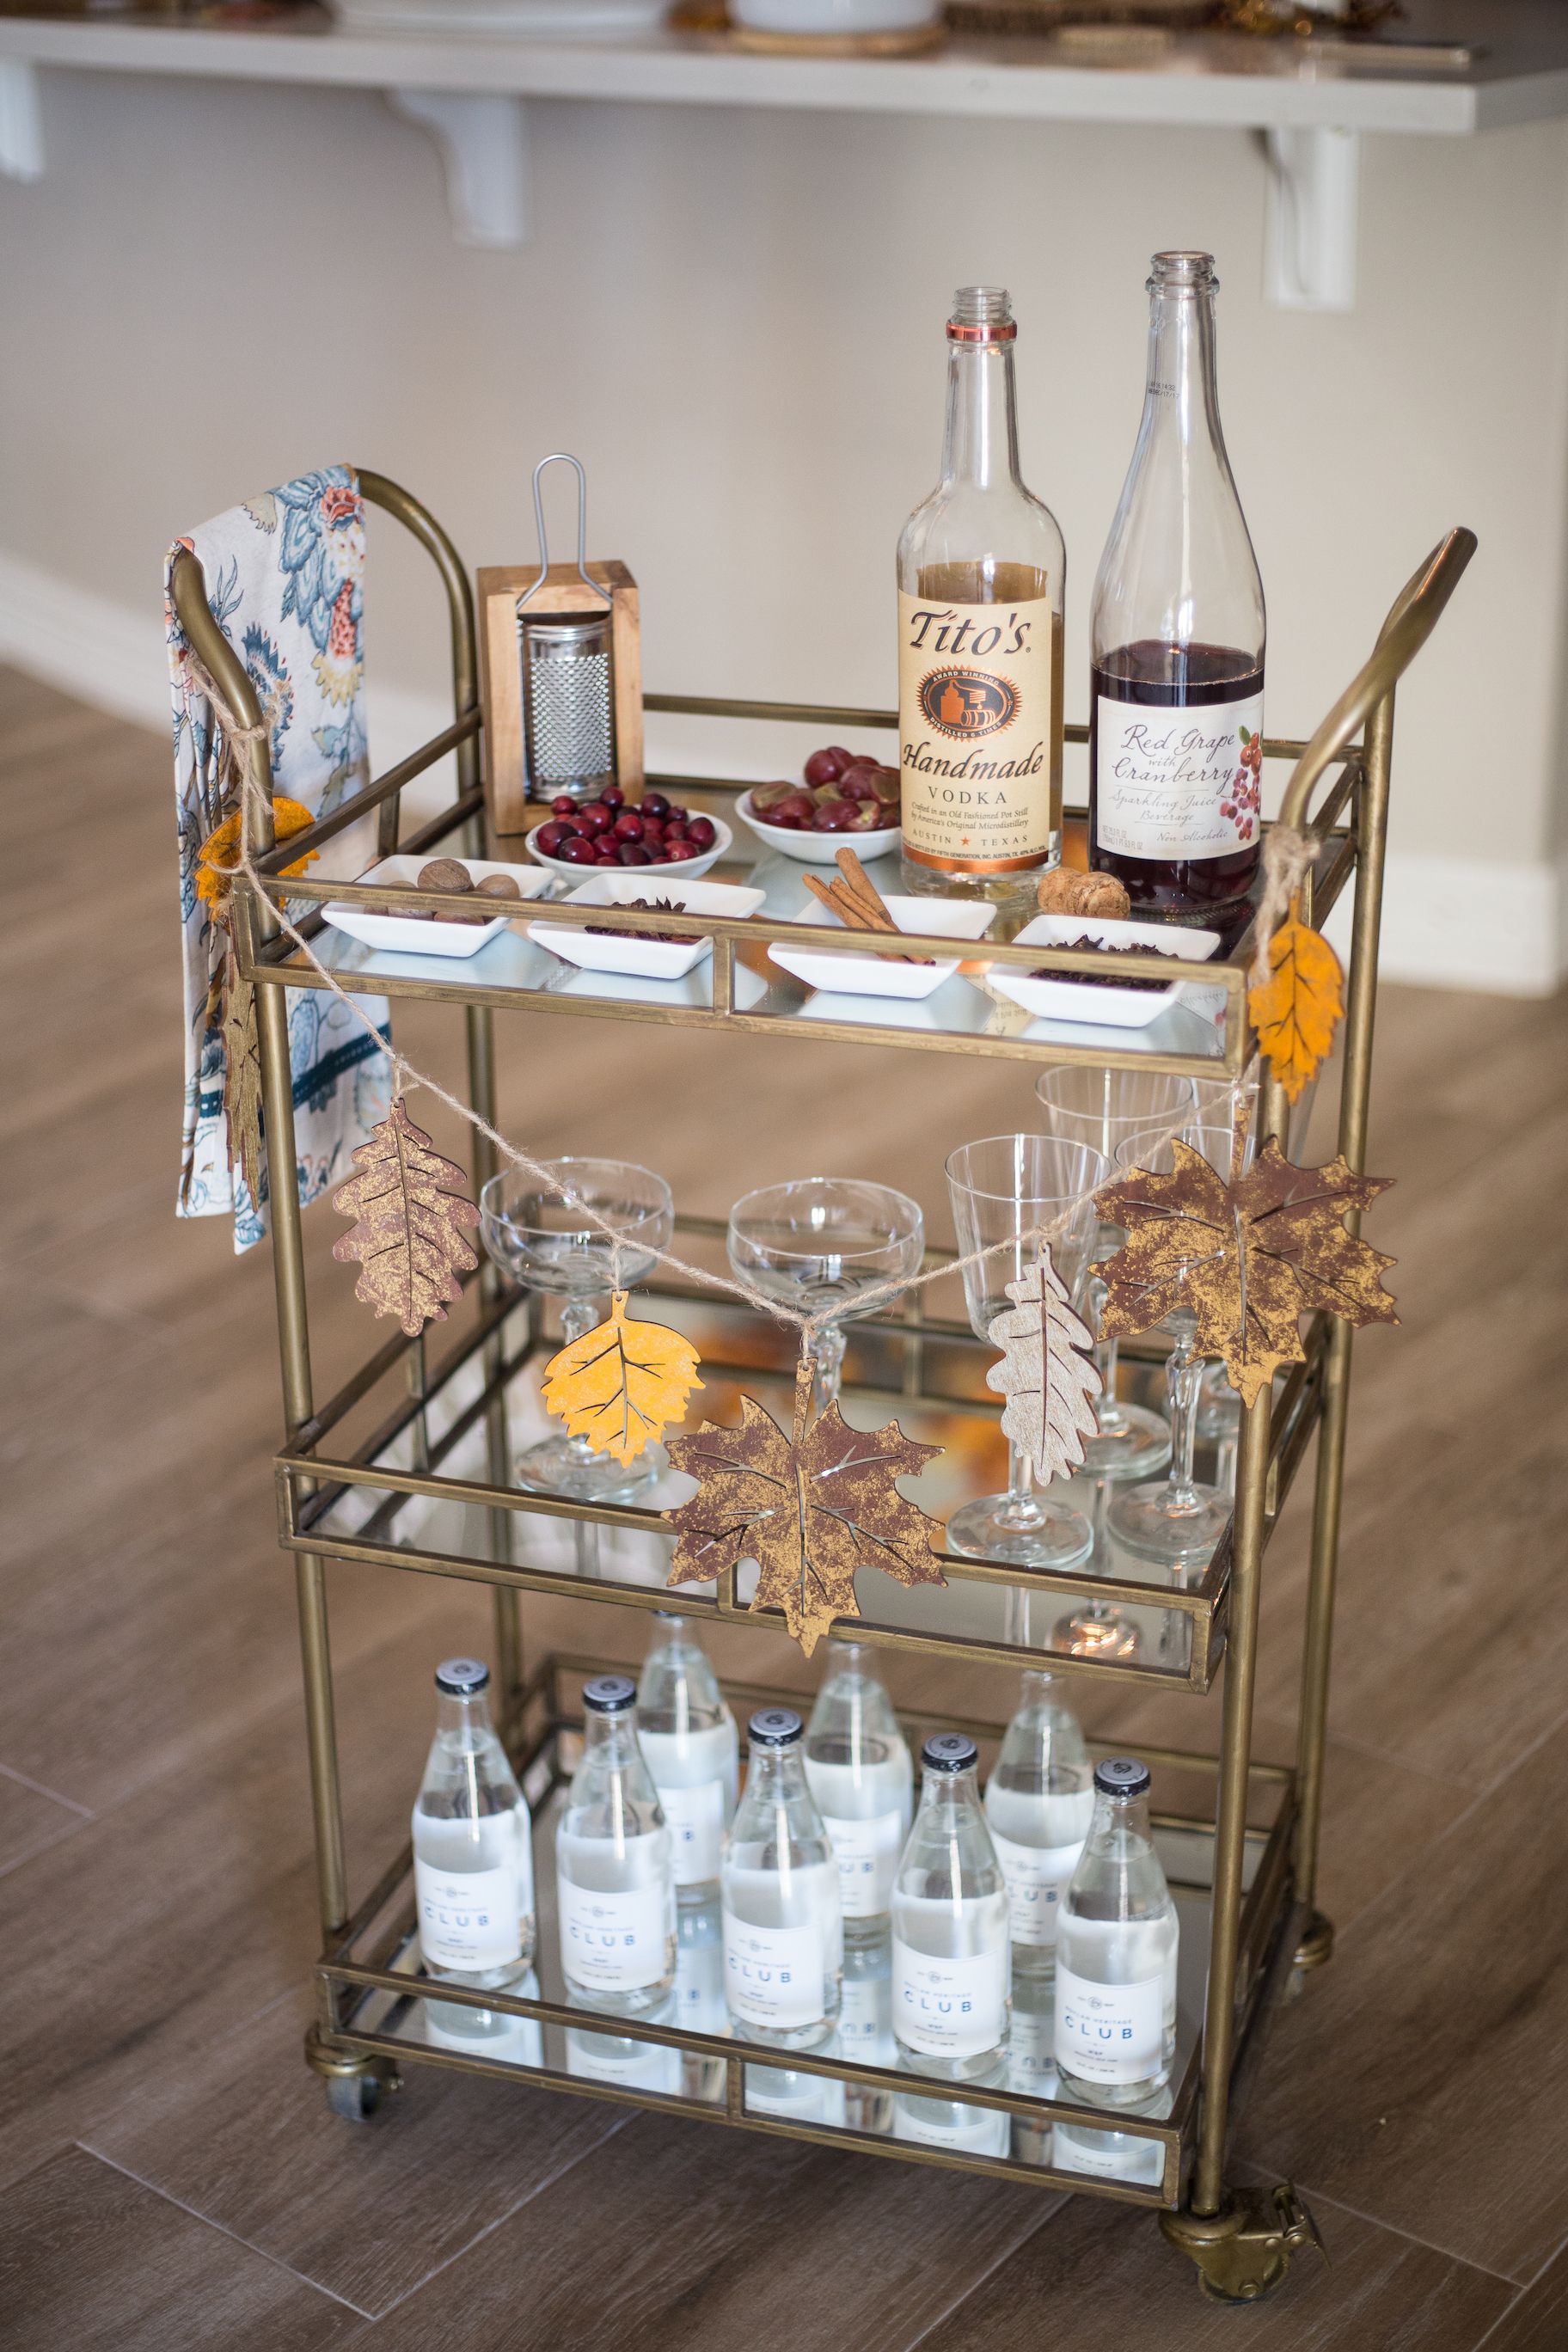 Styling a Home Bar is Easier When You Start With a Tray